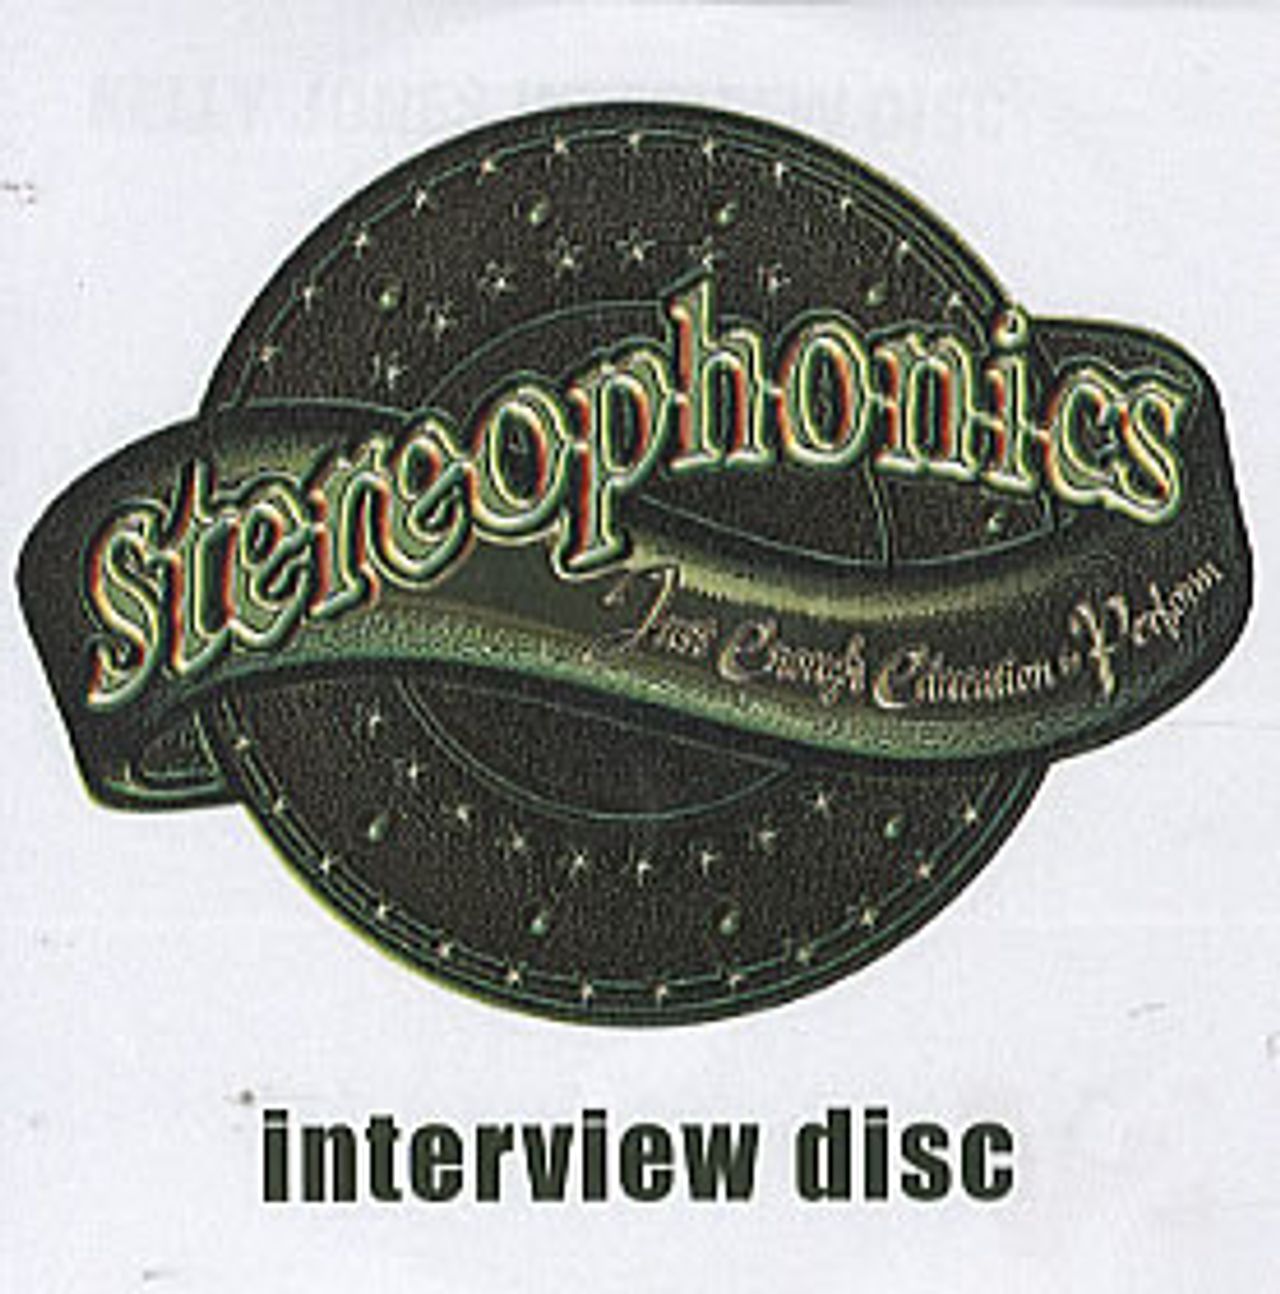 Stereophonics Interview Disc UK Promo CD-R acetate CD-R